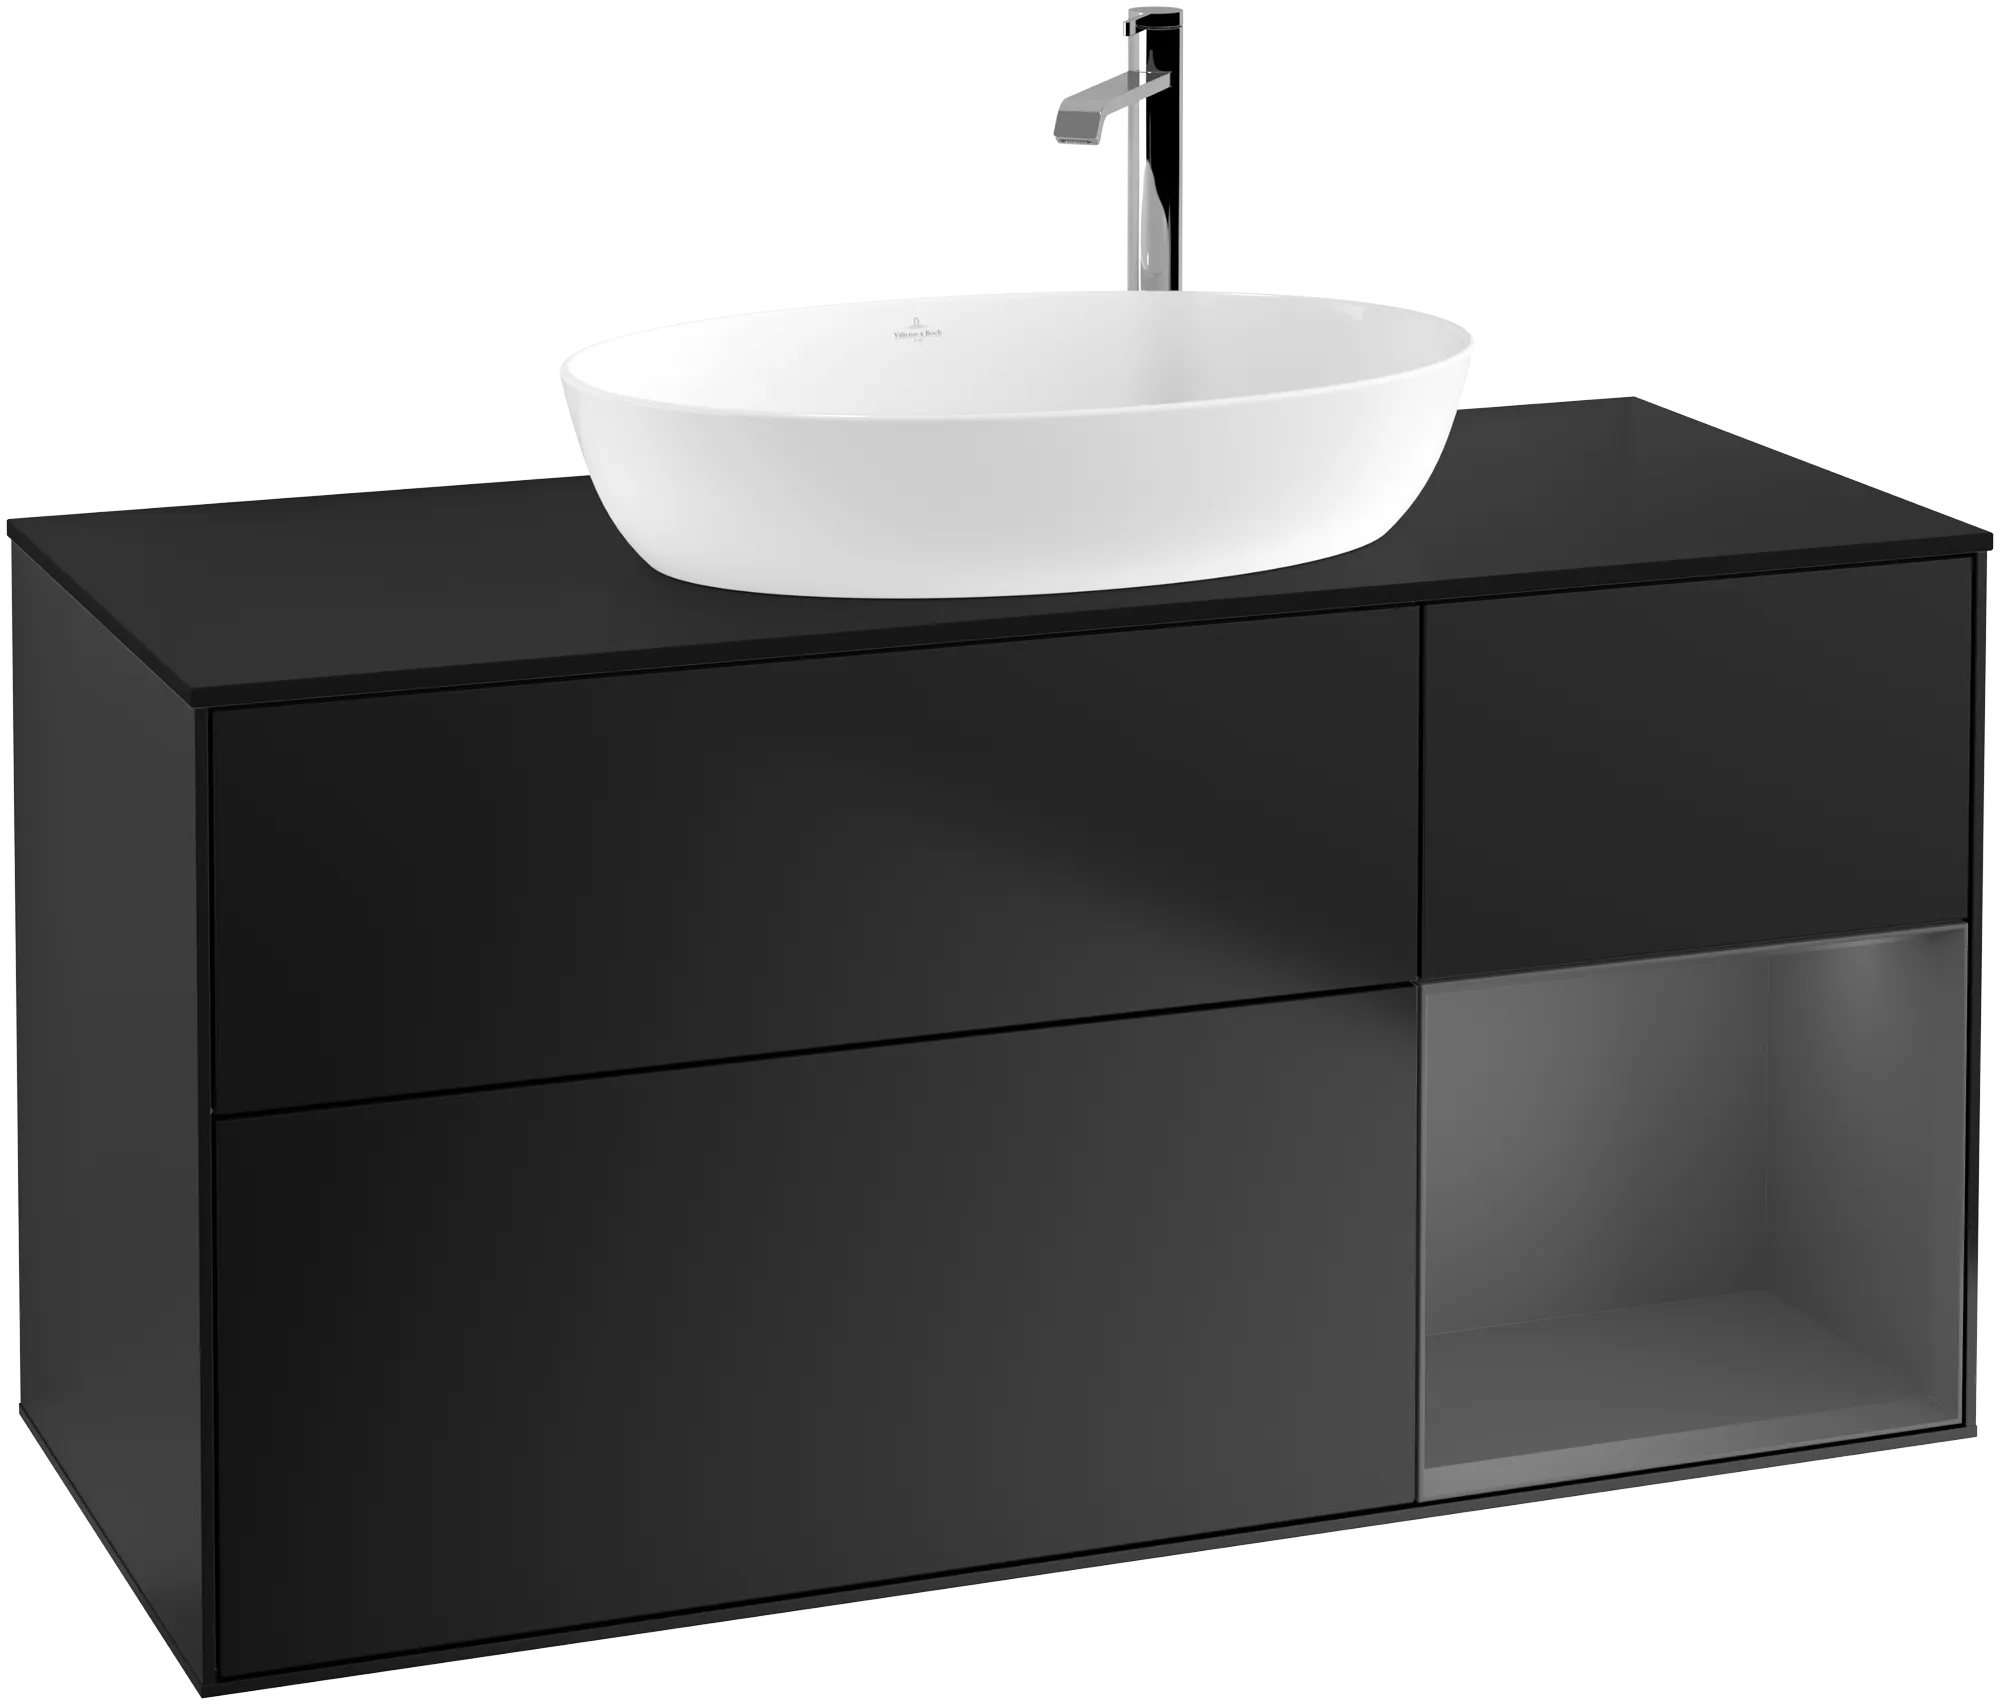 VILLEROY BOCH Finion Vanity unit, with lighting, 3 pull-out compartments, 1200 x 603 x 501 mm, Black Matt Lacquer / Anthracite Matt Lacquer / Glass Black Matt #G952GKPD resmi